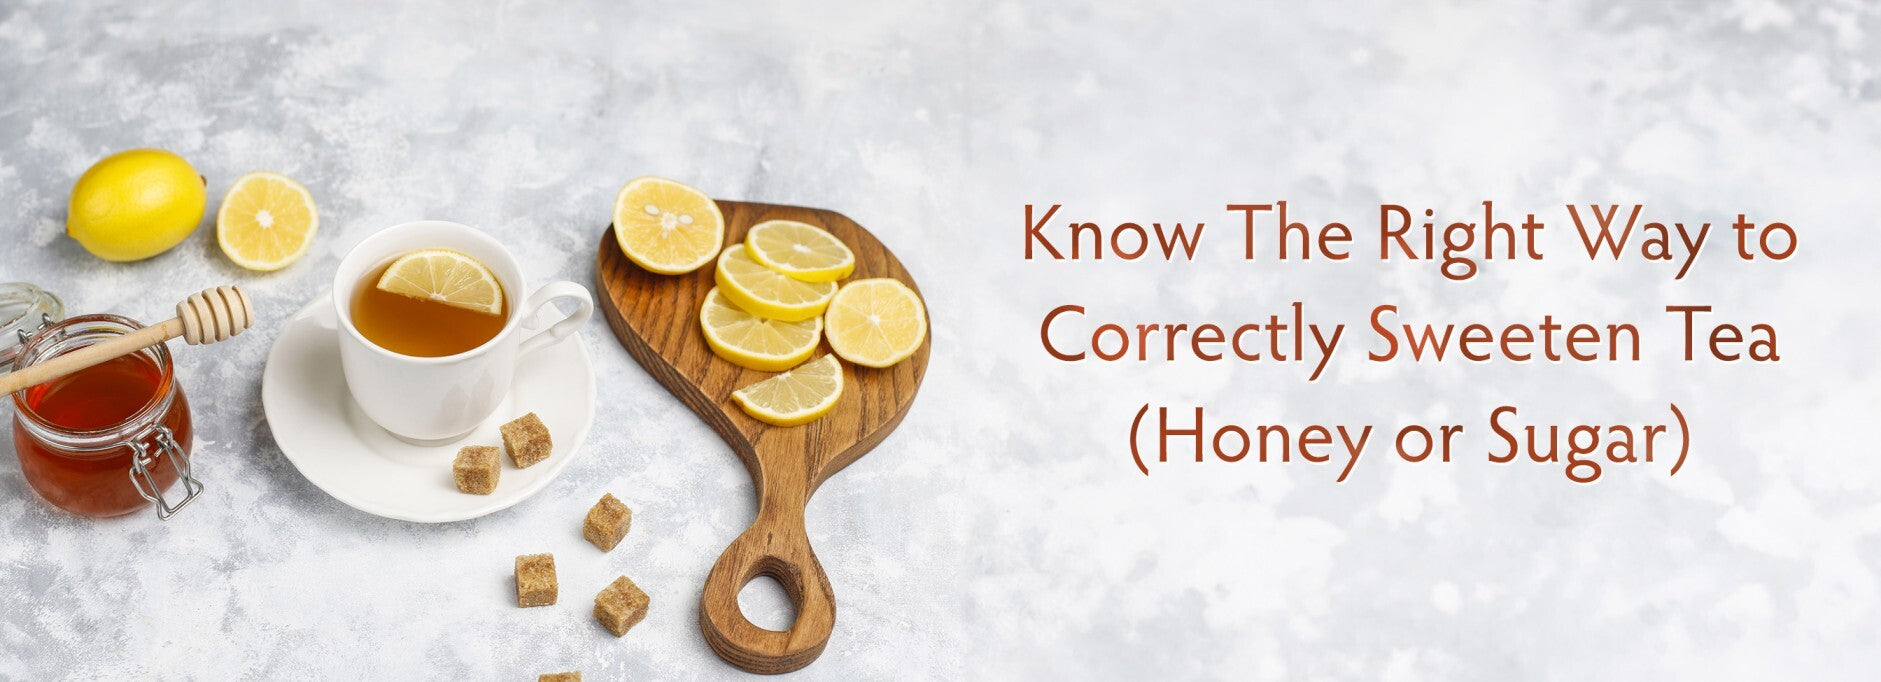 Know The Right Way to Correctly Sweeten Tea (Honey or Sugar)